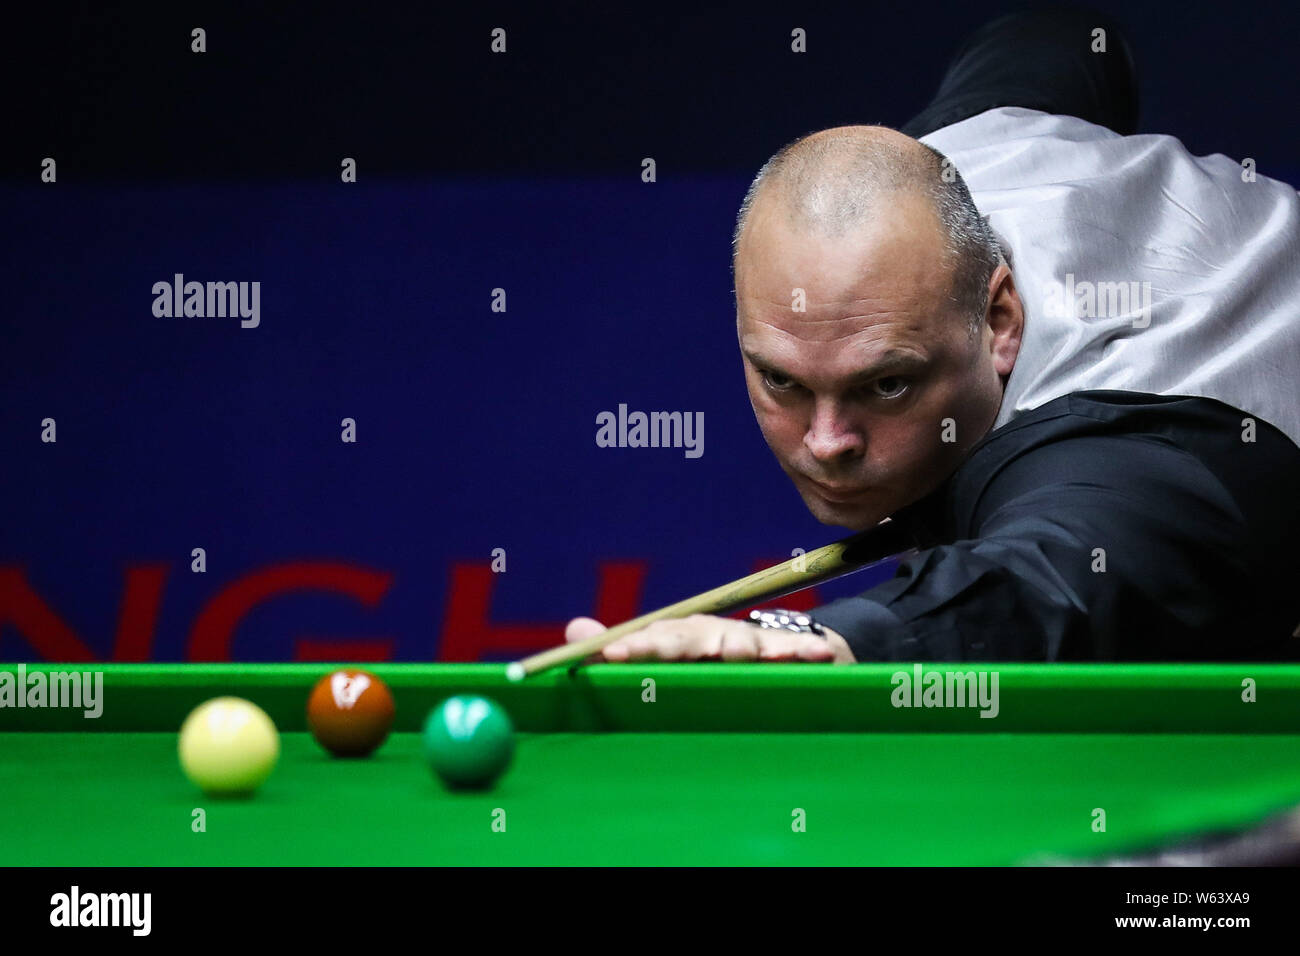 Stuart Bingham of England plays a shot to Fan Zhengyi of China in their first round match during the 2018 Shanghai Masters snooker tournament in Shang Stock Photo